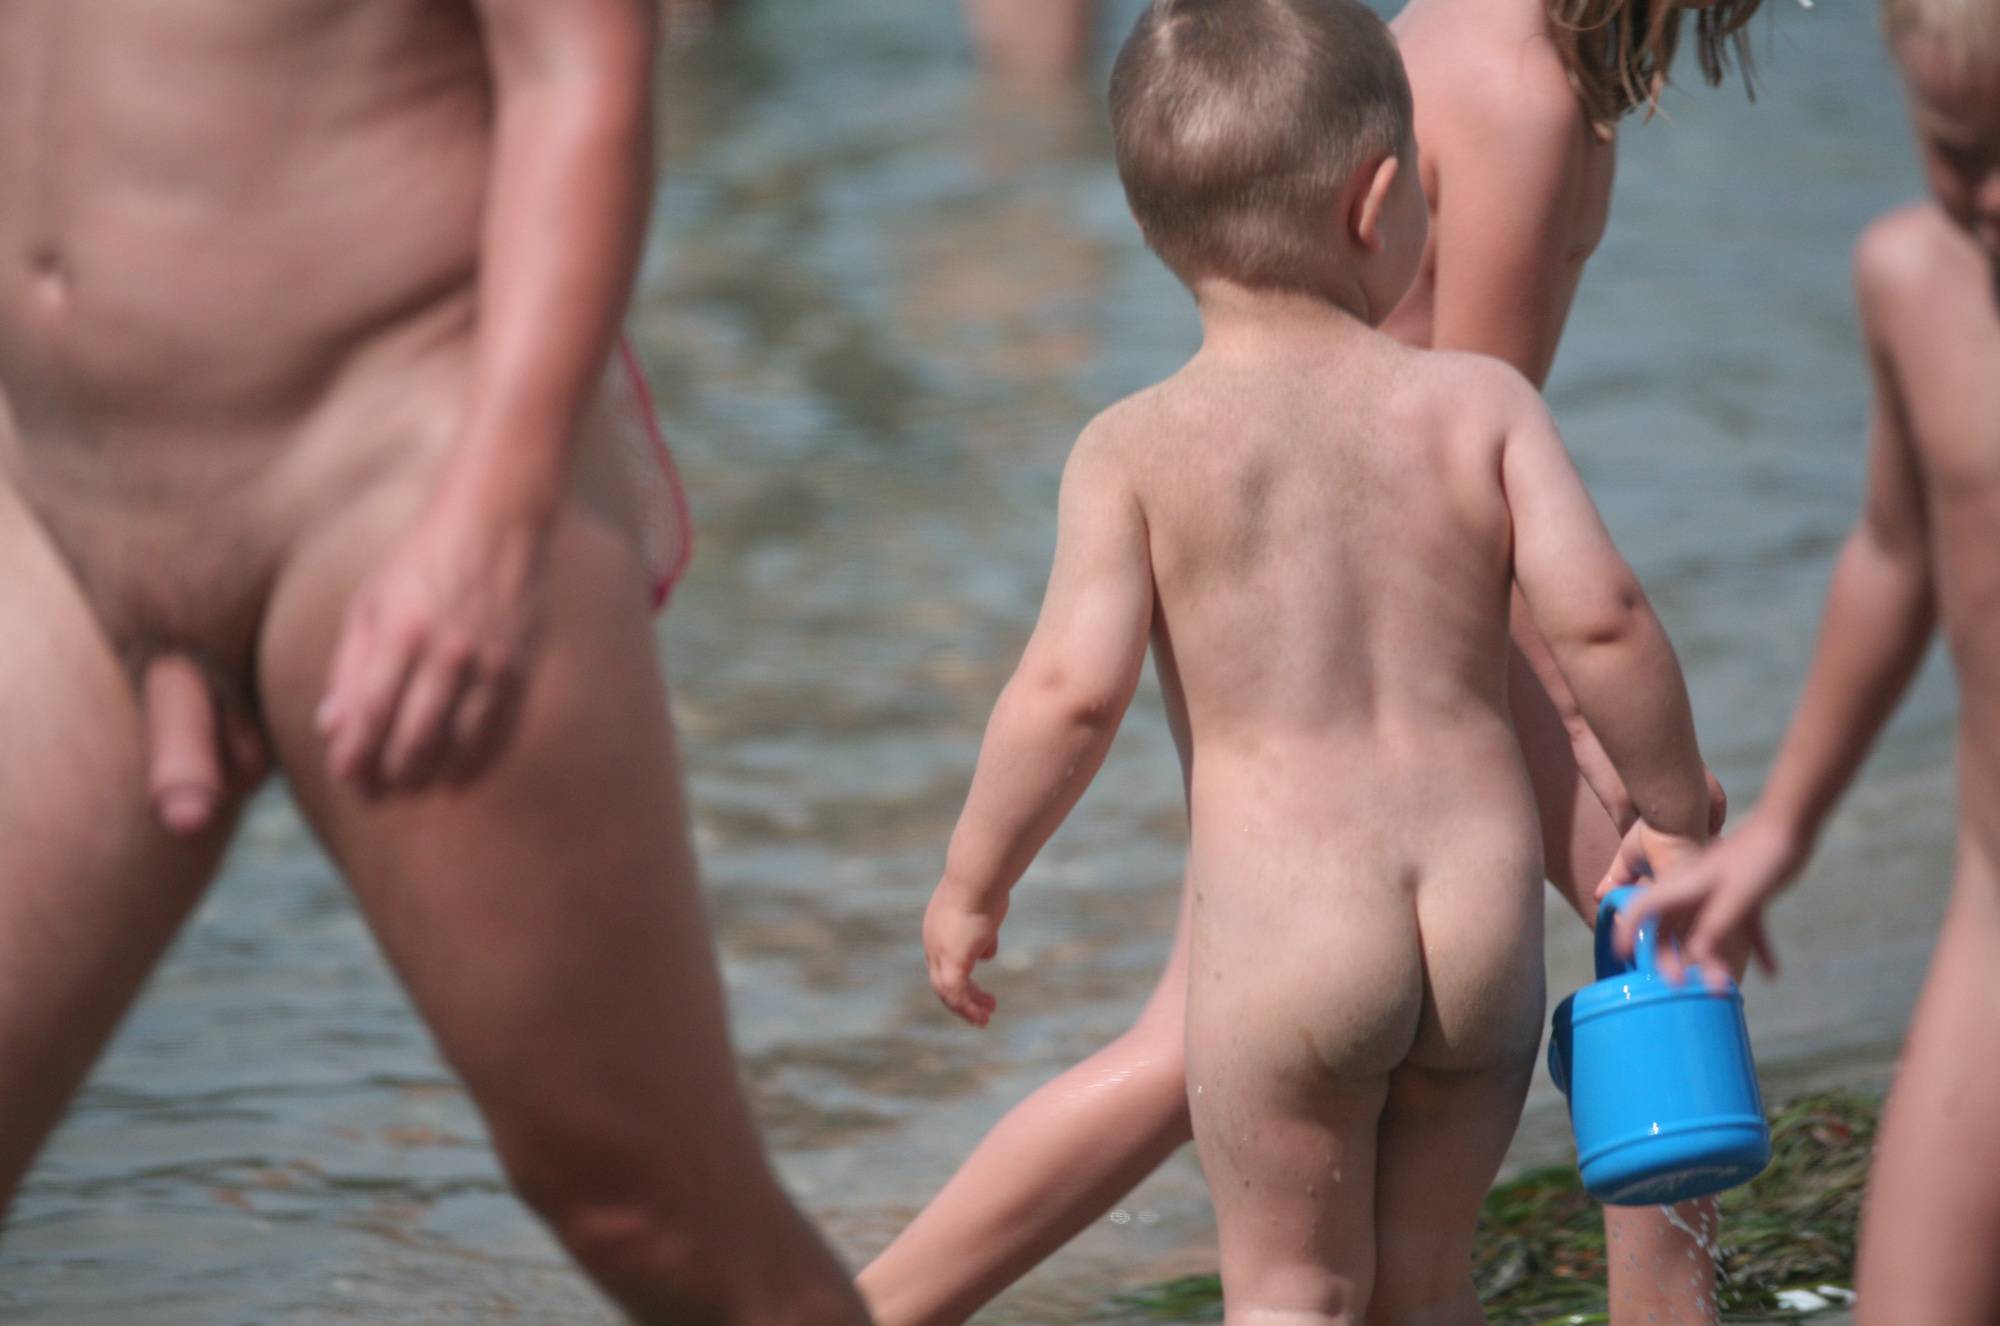 Purenudism Images Naturist Youngster Beach - 1